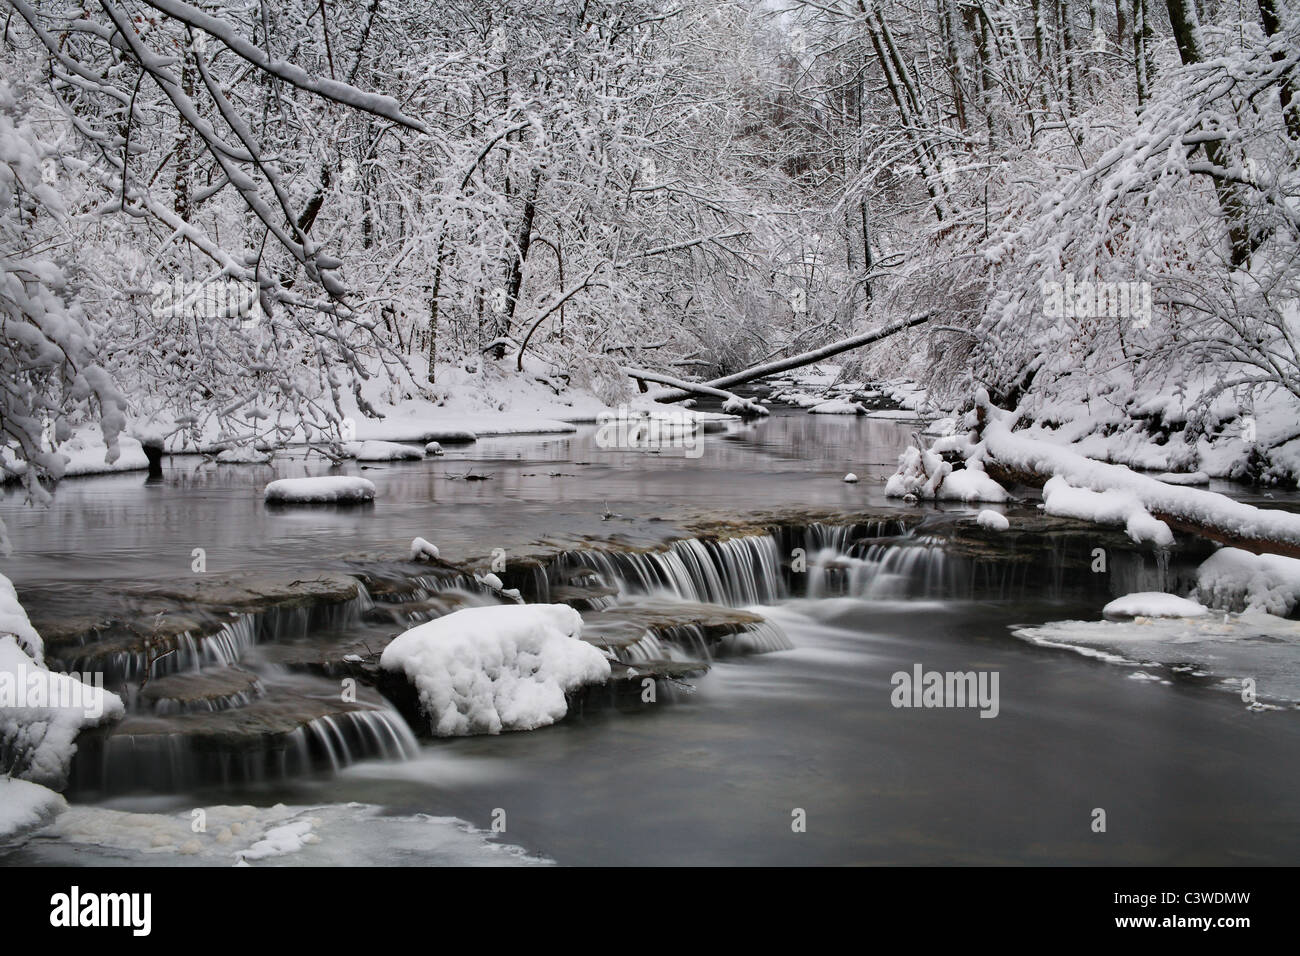 A Snow Covered Little Creek And Waterfall In Winter, Keehner Park, Southwestern Ohio, USA Stock Photo